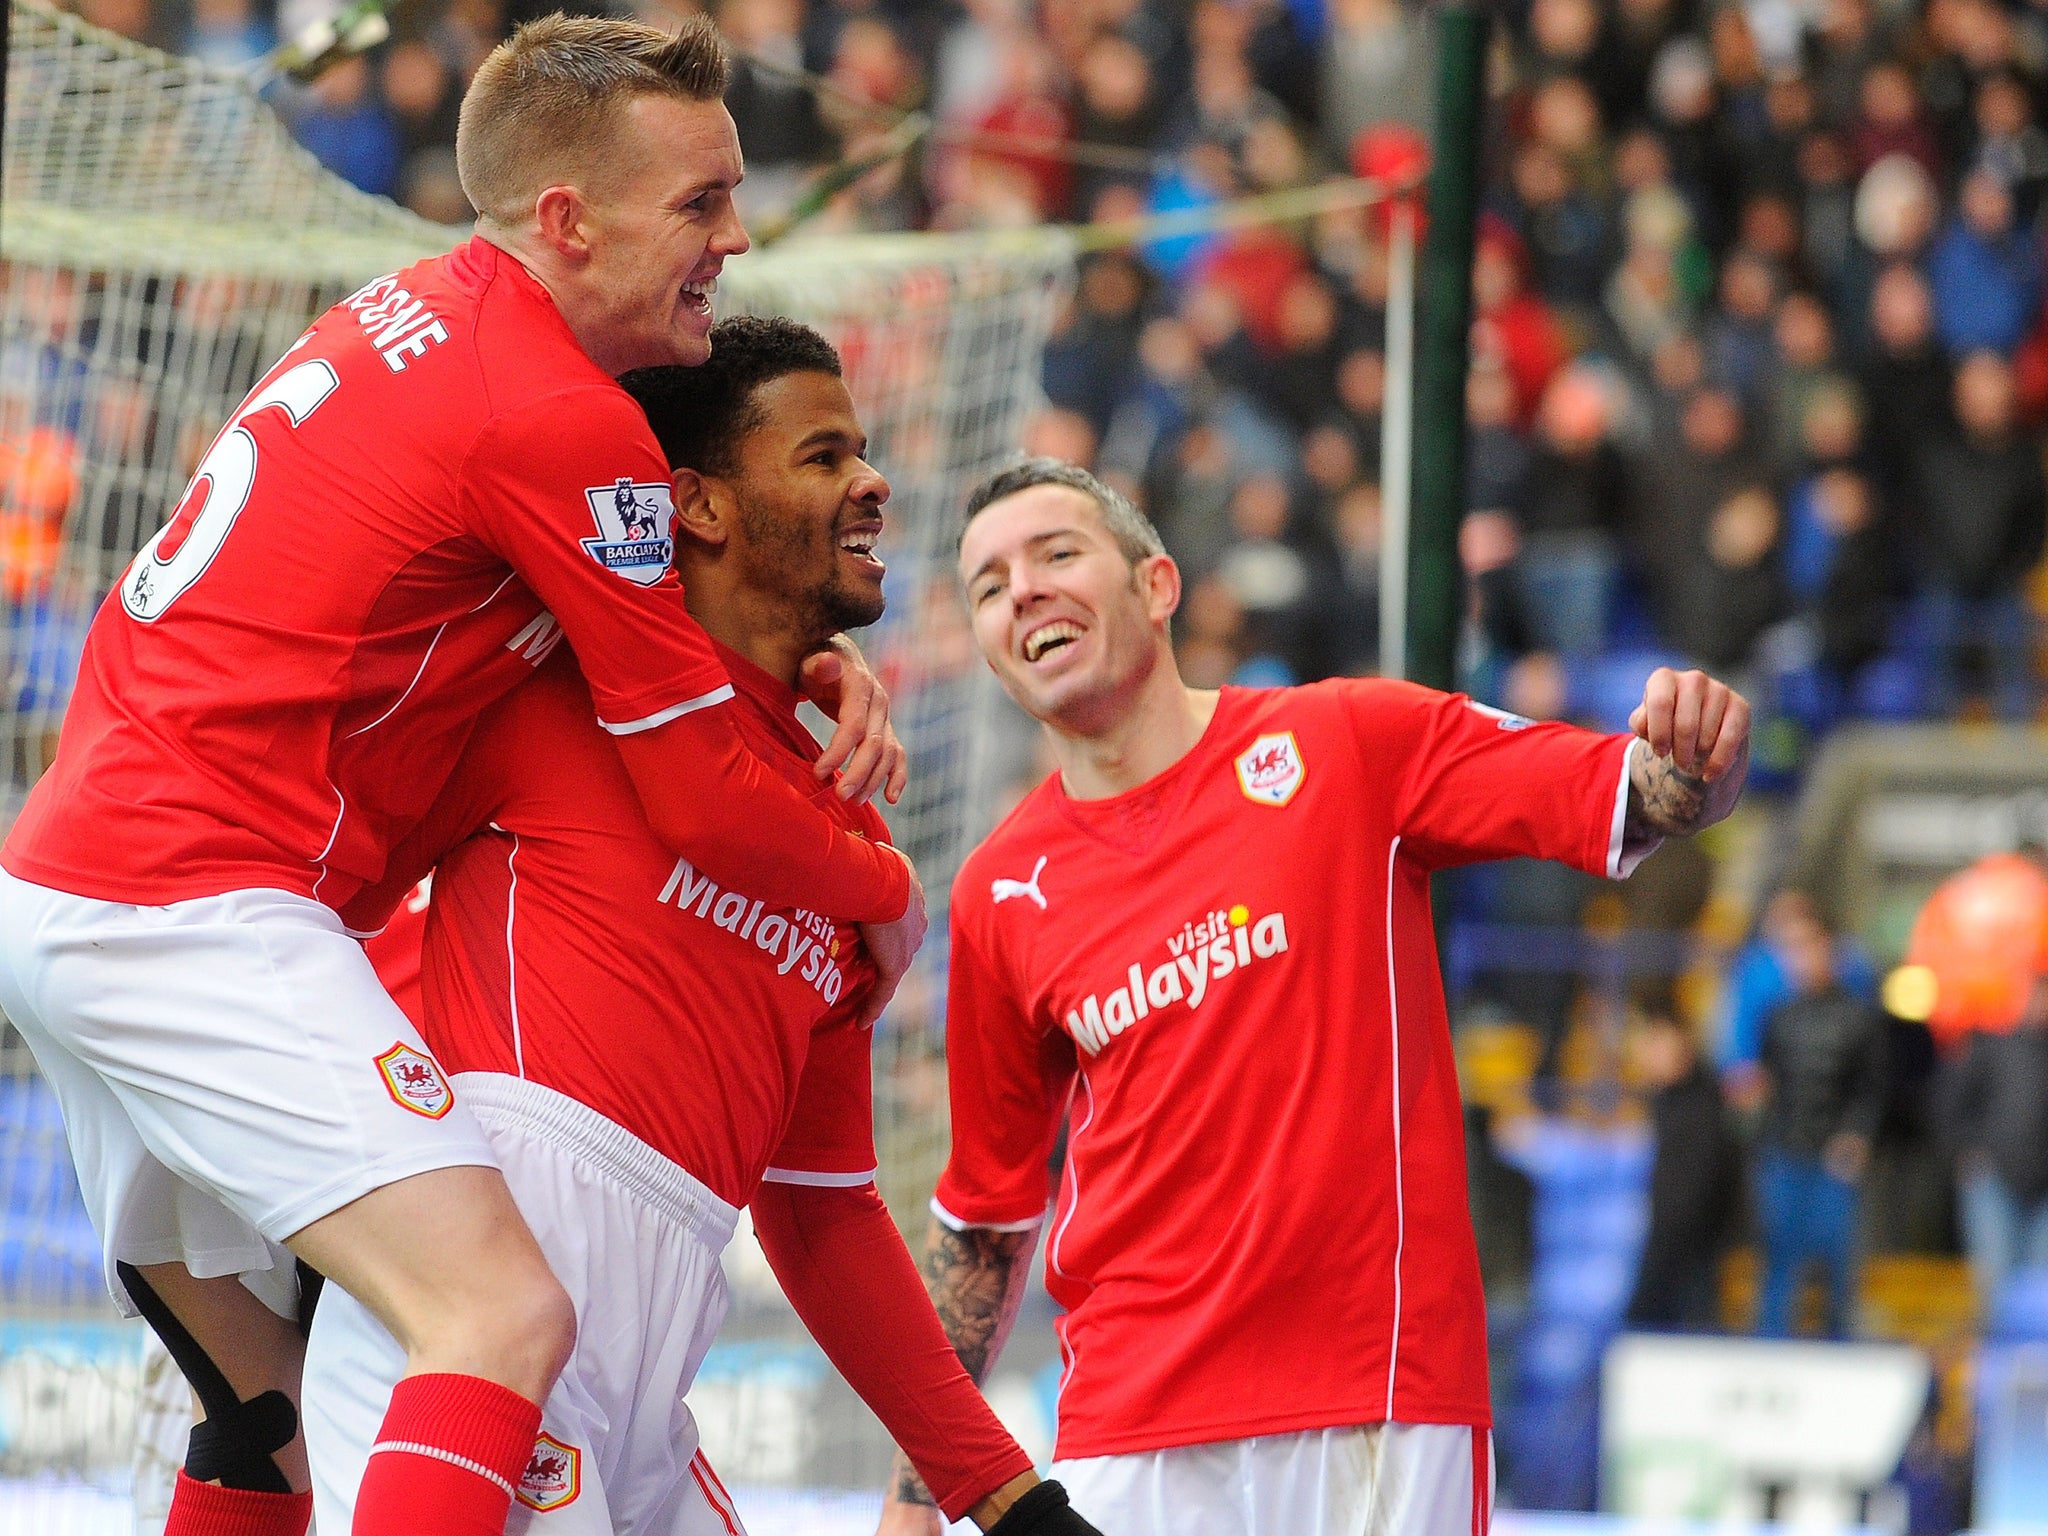 Frazier Campbell celebrates with Criag Noone after scoring for Cardiff in the FA Cup against Birmingham